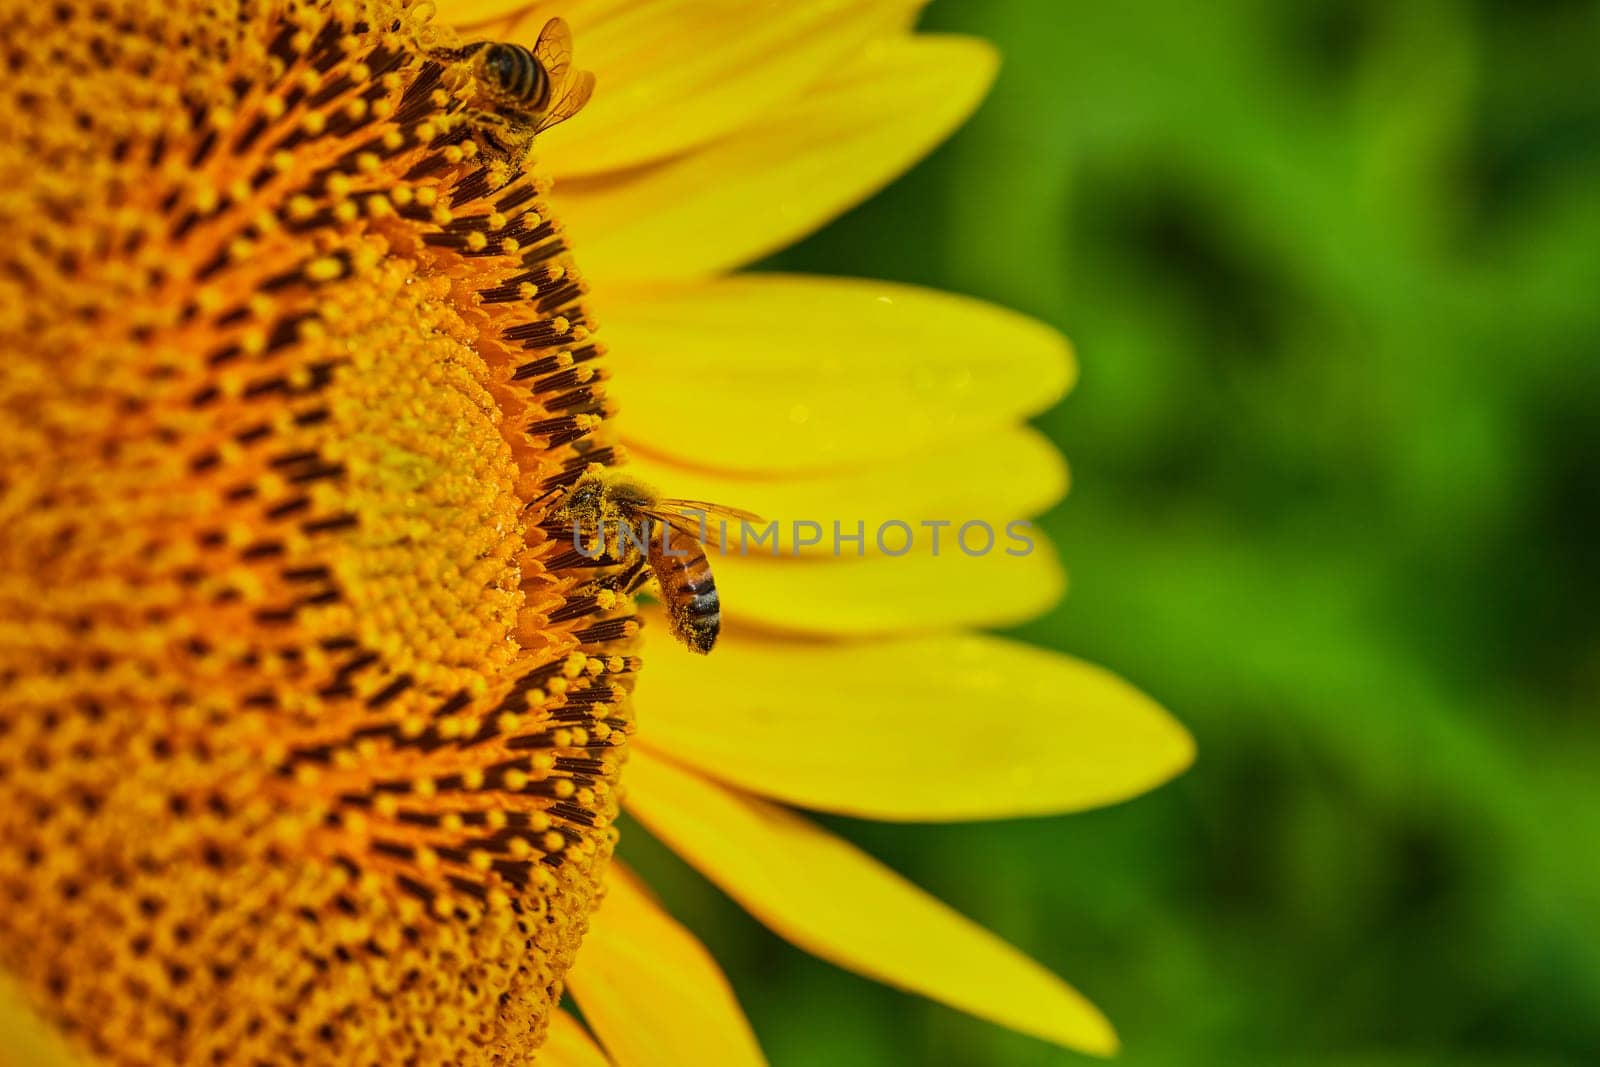 Image of Macro of two bees pollinating center of yellow sunflower with blurry green background